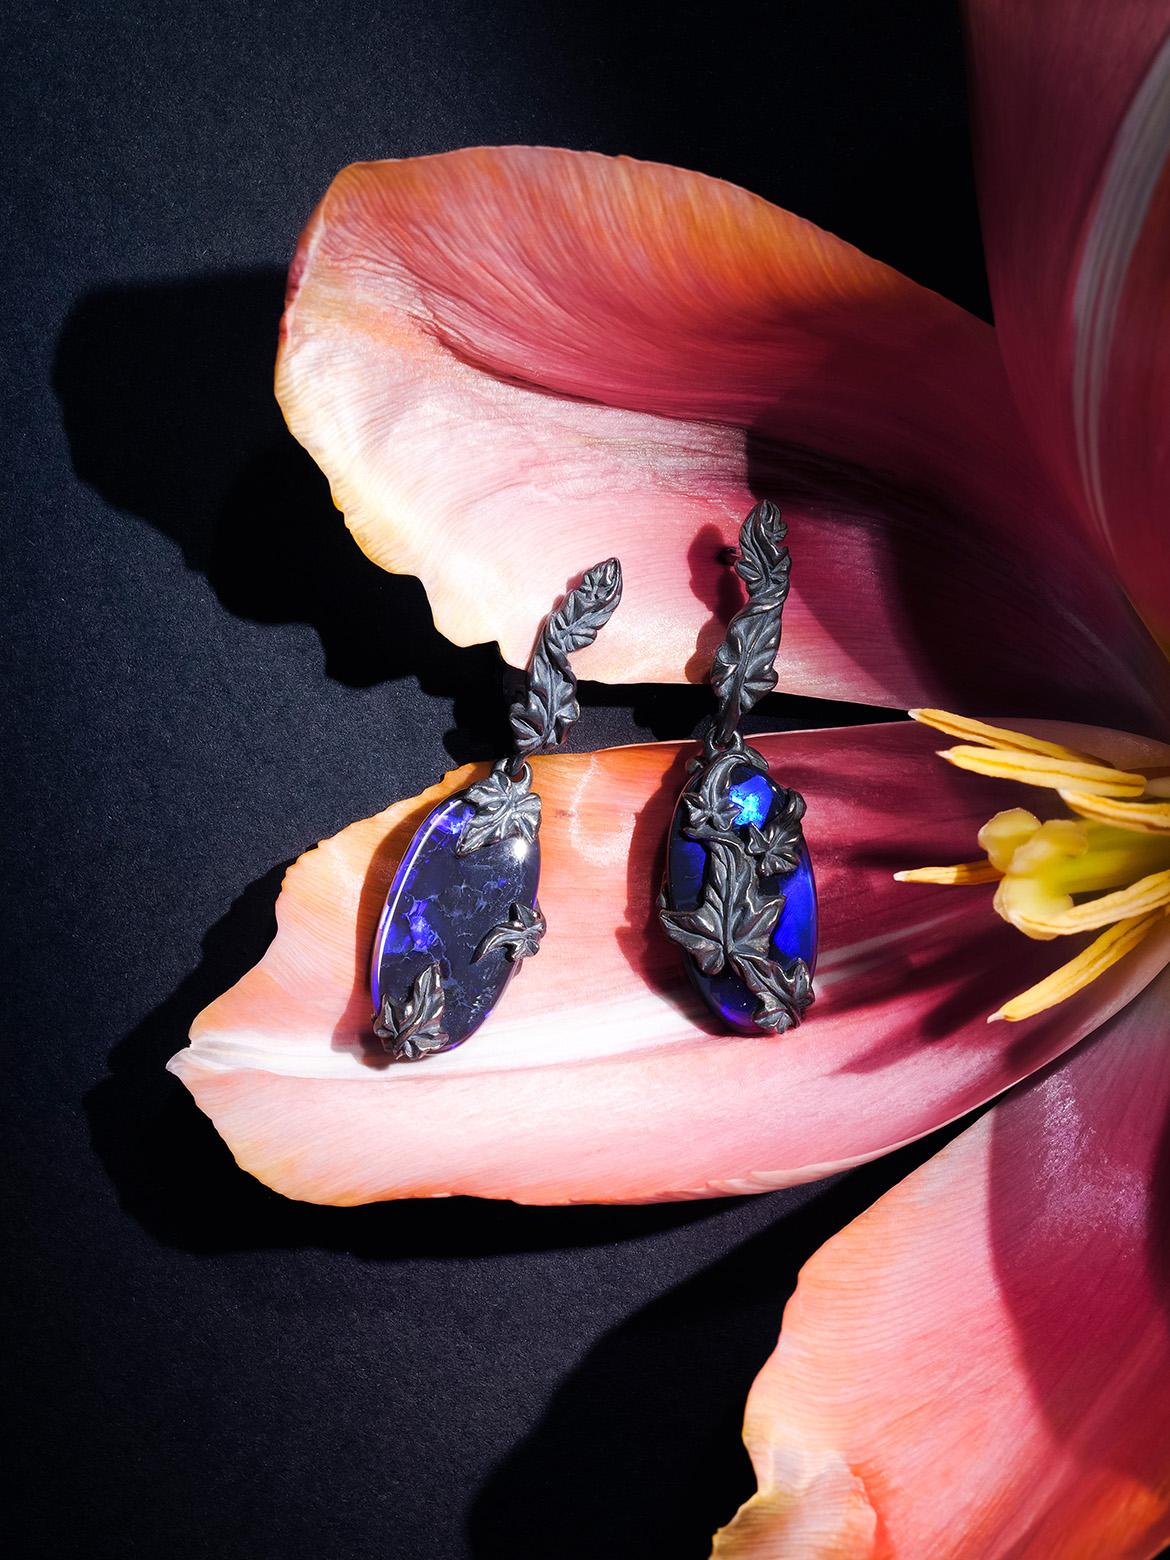 Ivy collection — One of a kind Blue «Ink» Opal earrings in silver with grey patina
gemstone origin - Australia
opals measurements - 0.19 x 0.43 x 0.94 in / 5 x 11 x 24 mm
earrings weight - 11.8 grams
earrings length - 1.81 in / 46 mm